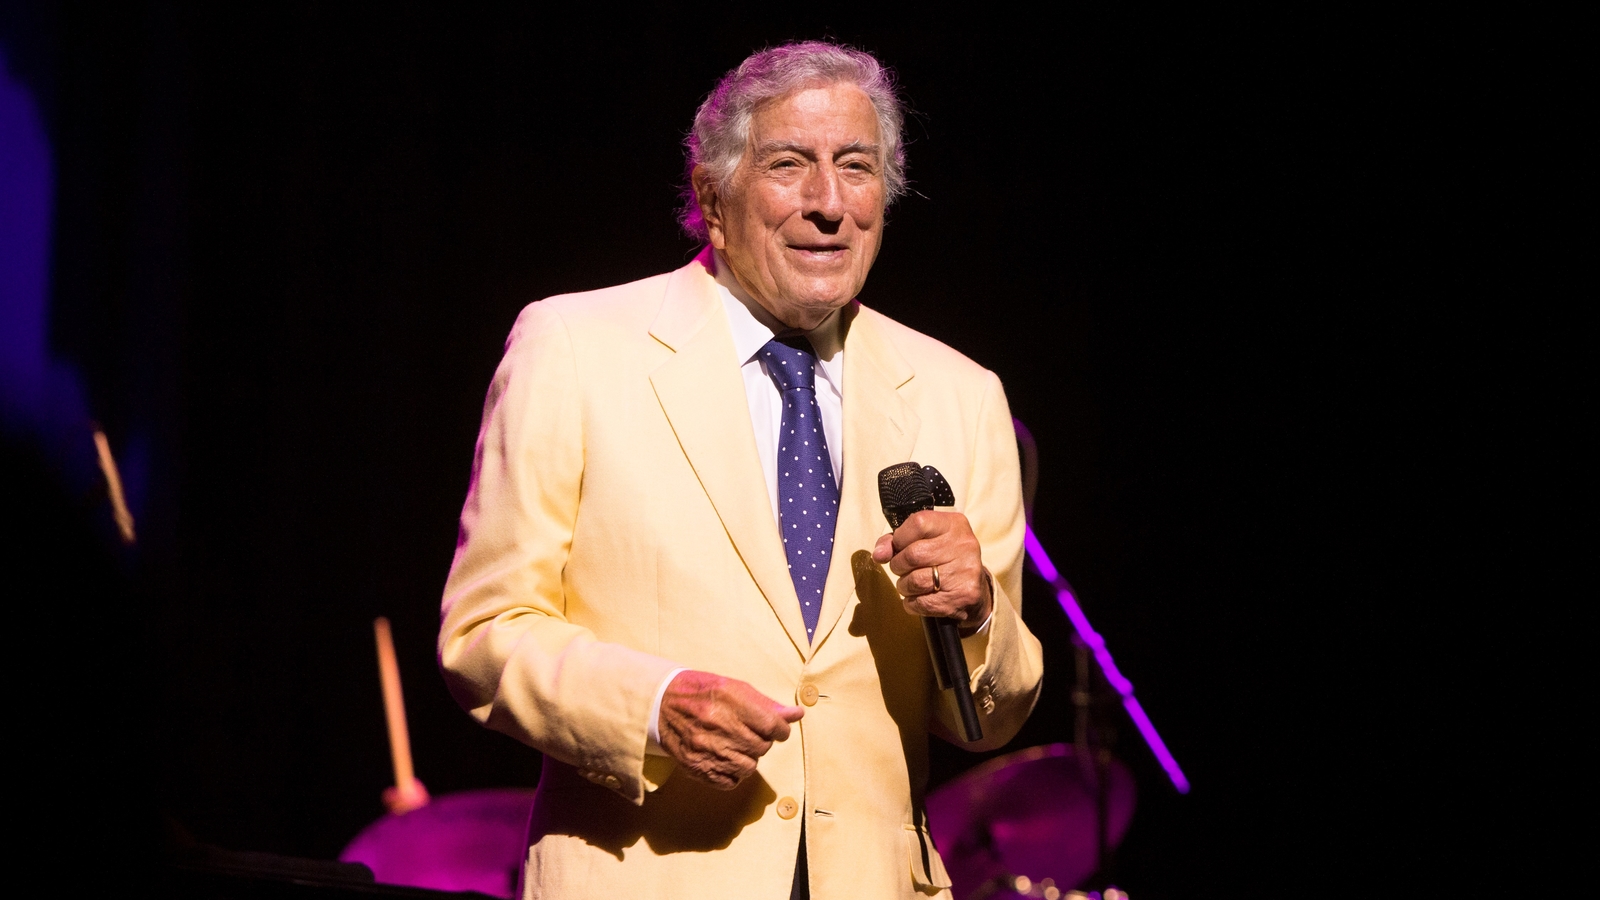 Tony Bennett Death Masterful Singer Known For I Left My Heart In San Francisco Dies At 96 9017